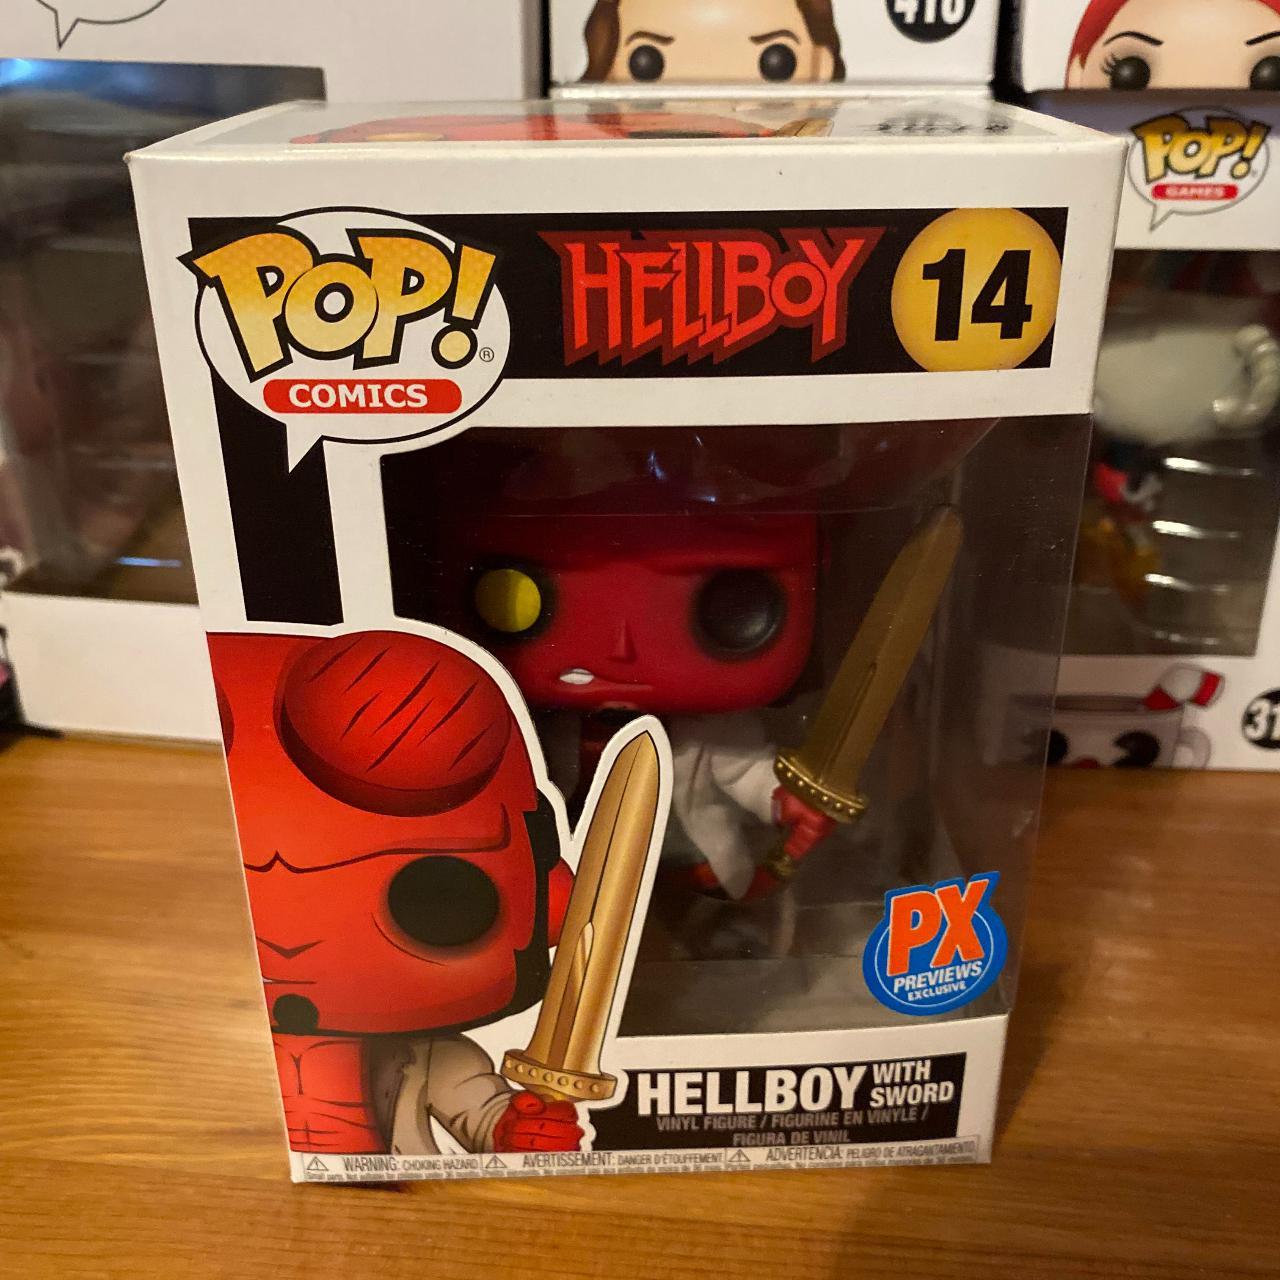 Product Image 1 - Hellboy With Sword Funko Pop
PX